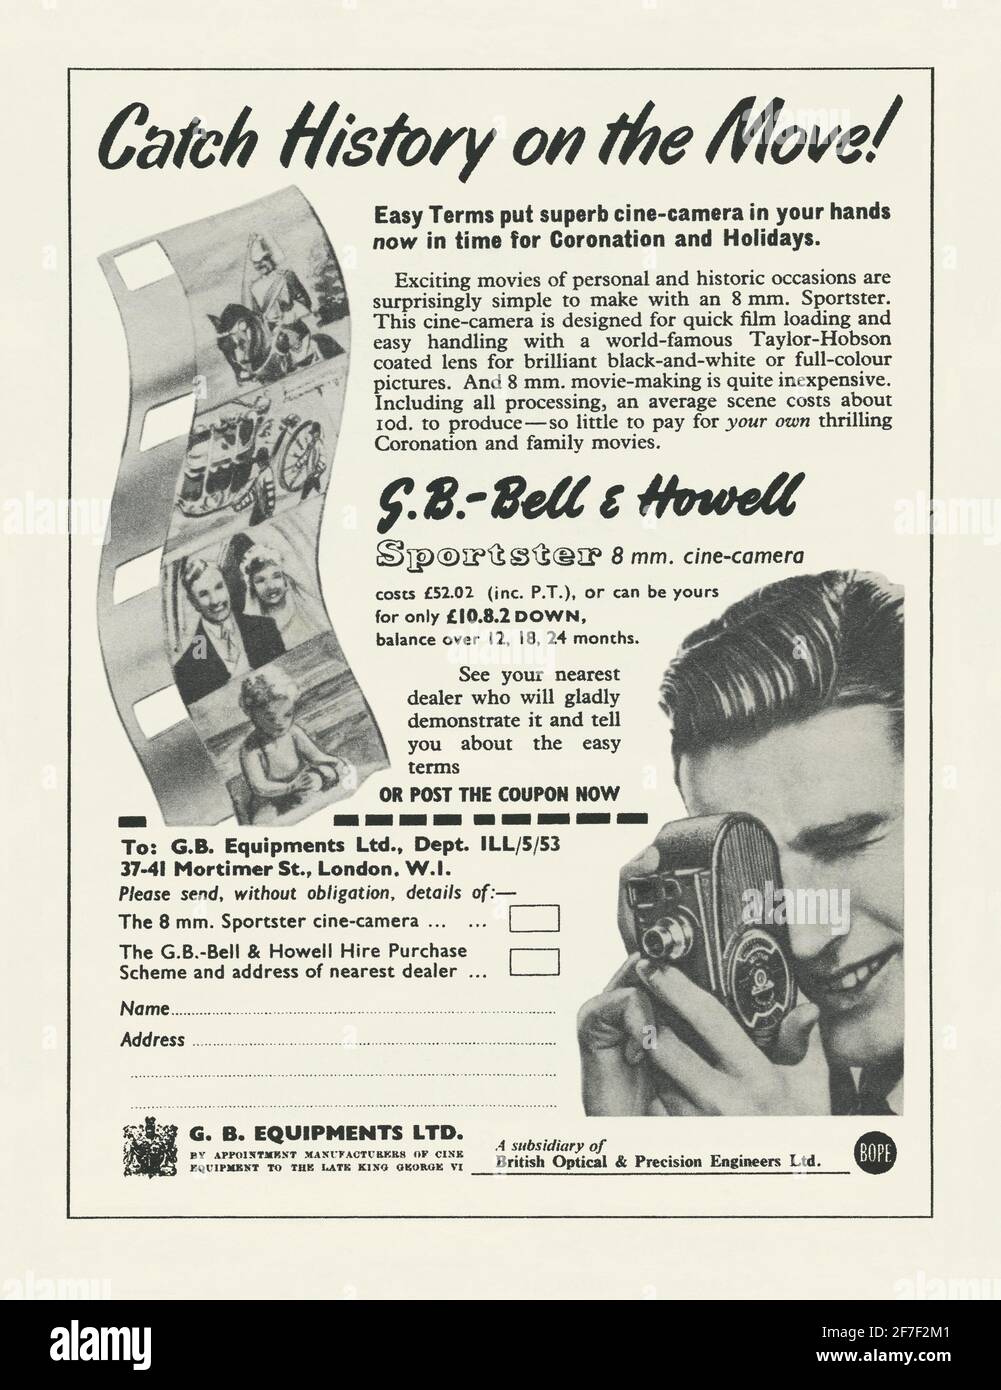 A 1950s advert for a Bell & Howell sportster 8mm cine-camera – it appeared in British magazine in 1953. Making and showing home movies became a popular hobby in the 1950s as the cost of the camera, projector and developing became within reach of the middle classes. Here it is available by mail-order. 8mm (and Kodak’s Super-8) film was the way to capture moving images – sound recording became an option later. Bell & Howell was founded in 1907 by two projectionists and was originally based in Wheeling, Illinois, USA – vintage nineteen-fifties graphics for editorial use. Stock Photo